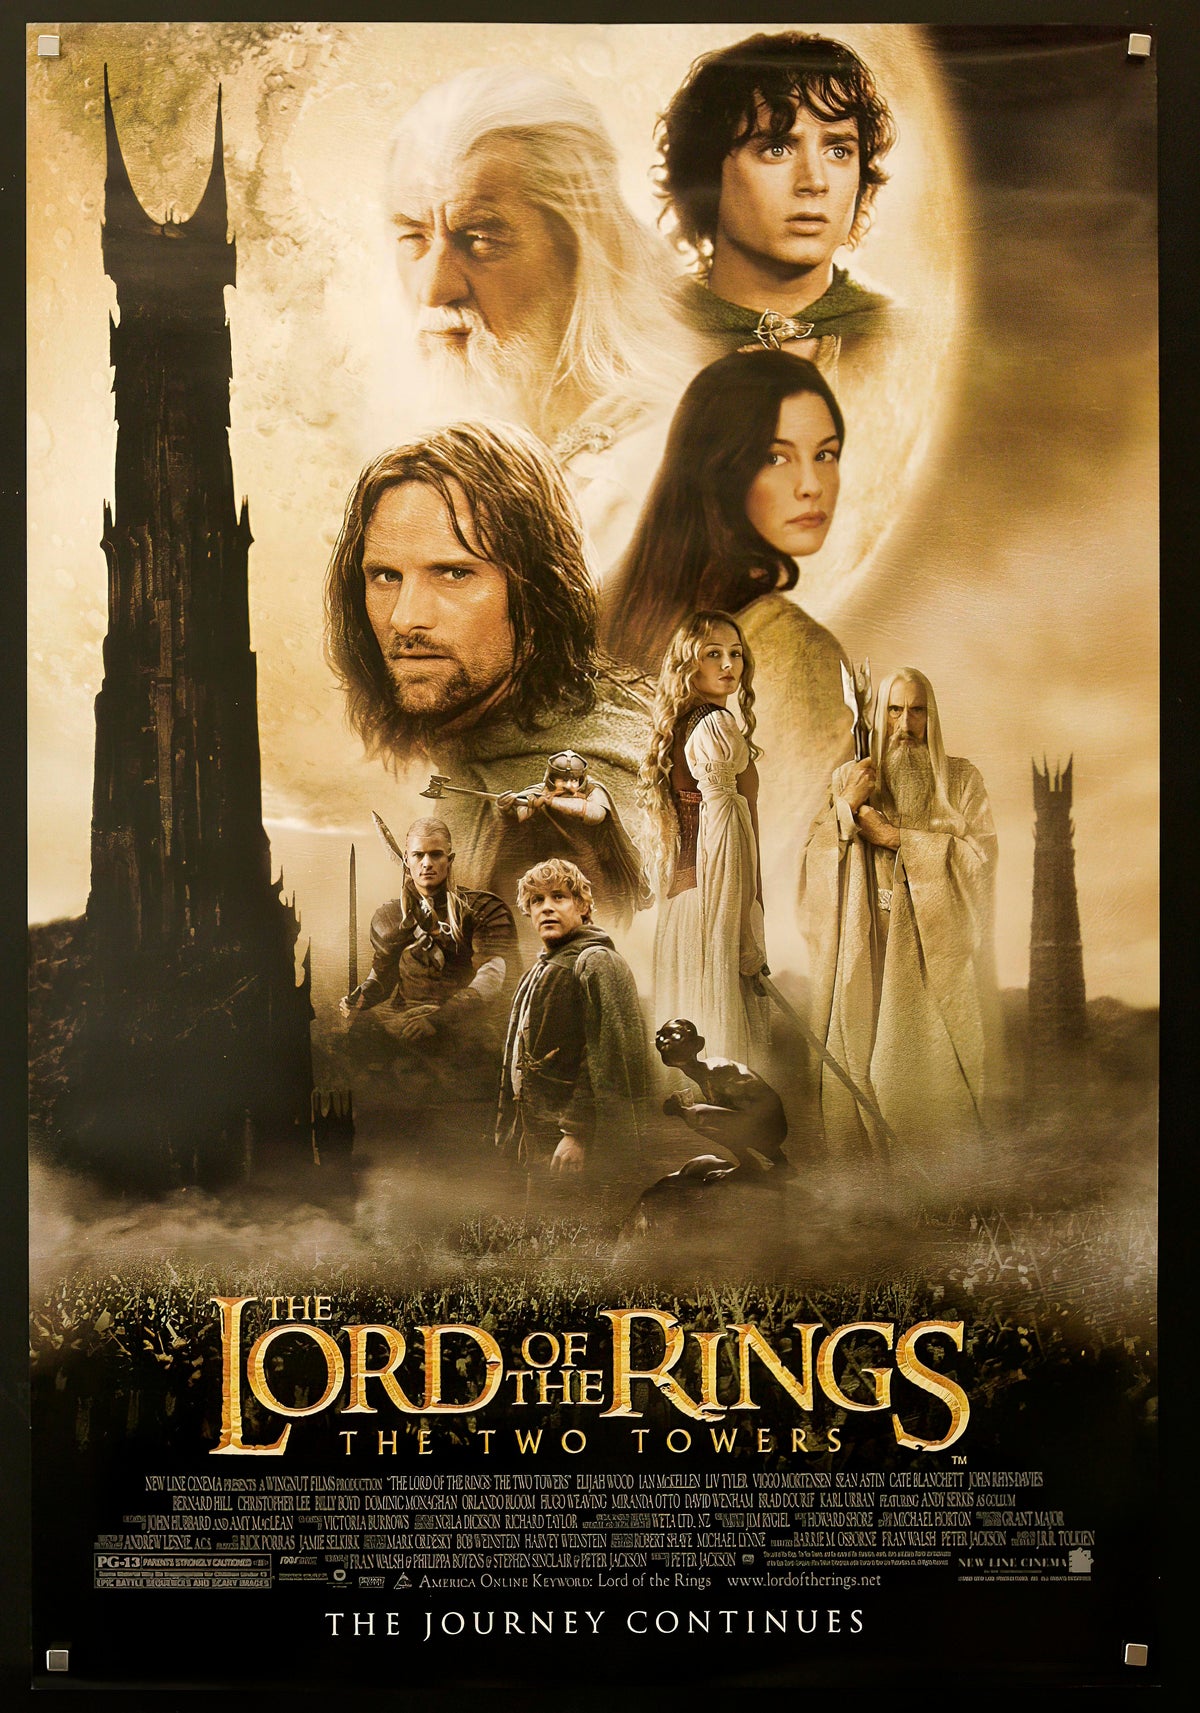 The Lord of the Rings: The Two Towers 1 Sheet (27x41) Original Vintage Movie Poster